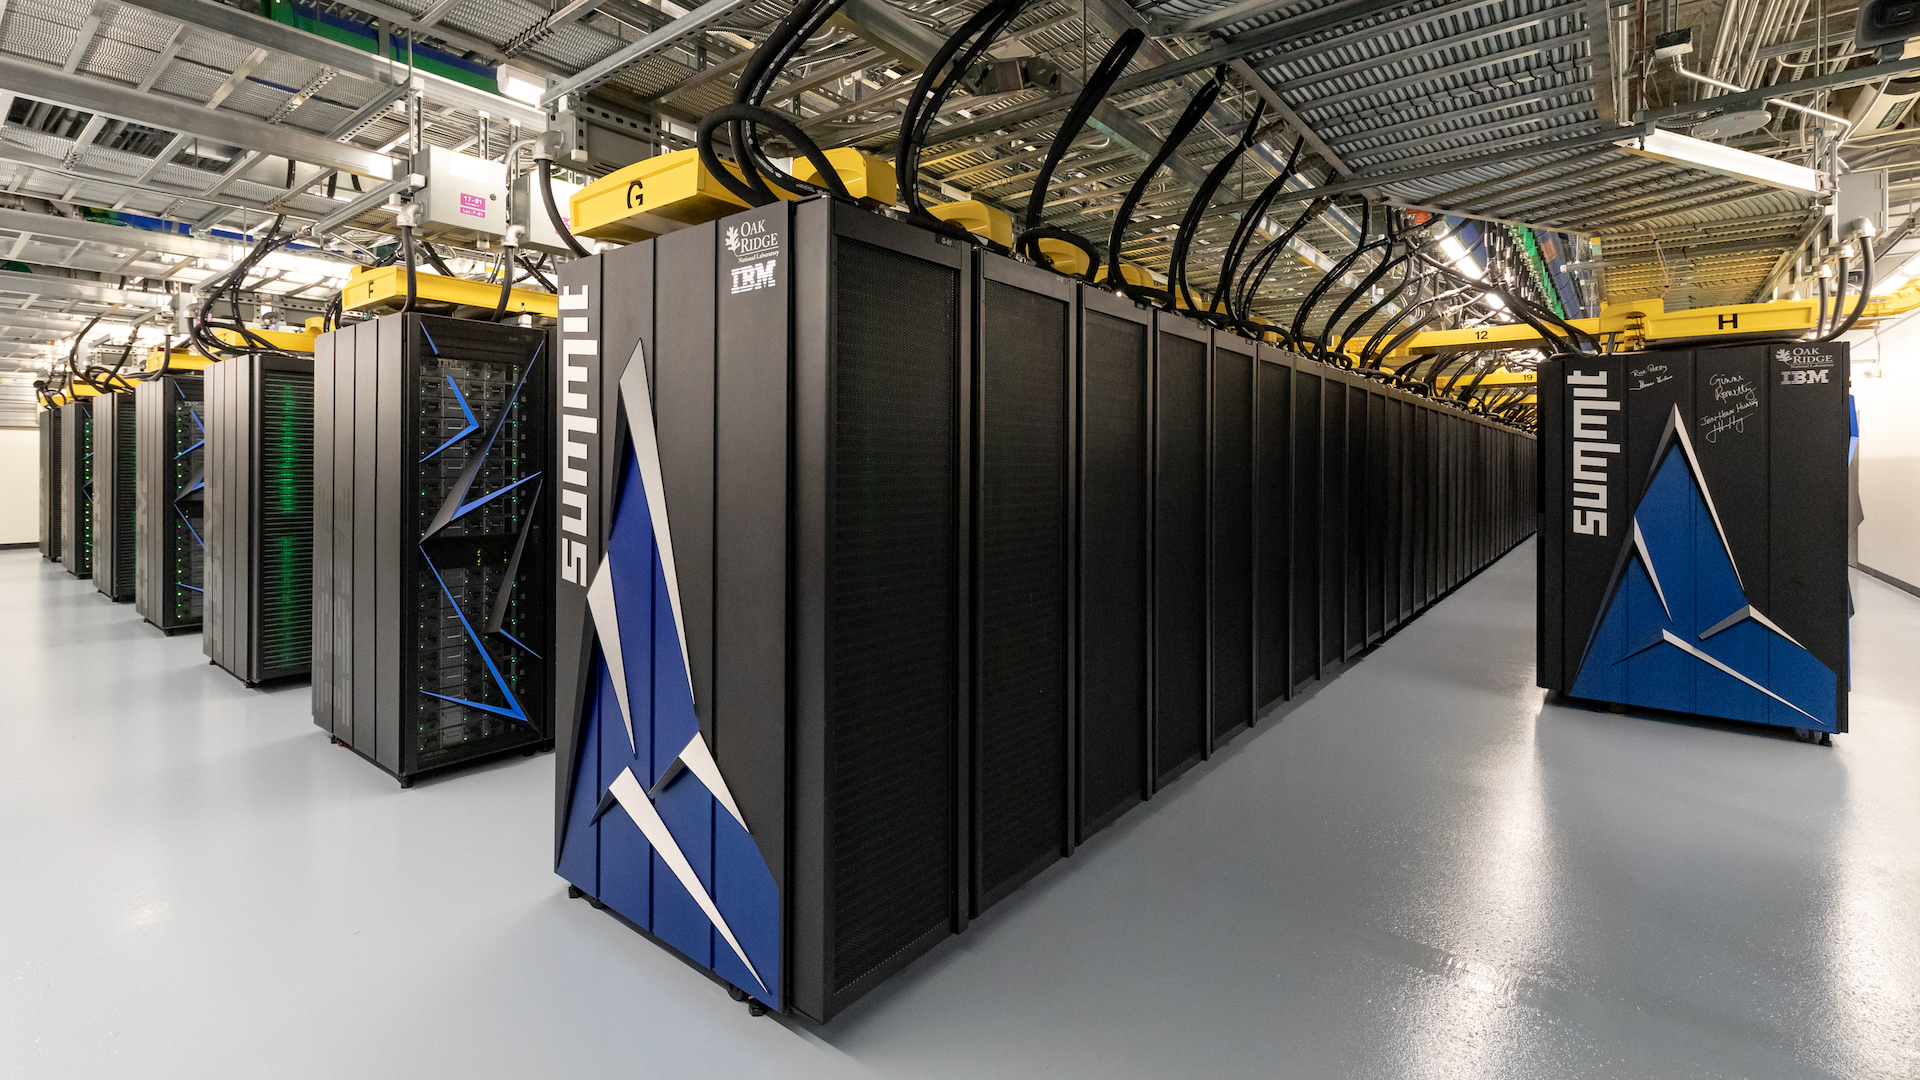 Scenic - computer room showing the Summit supercomputer, November 1, 2018.